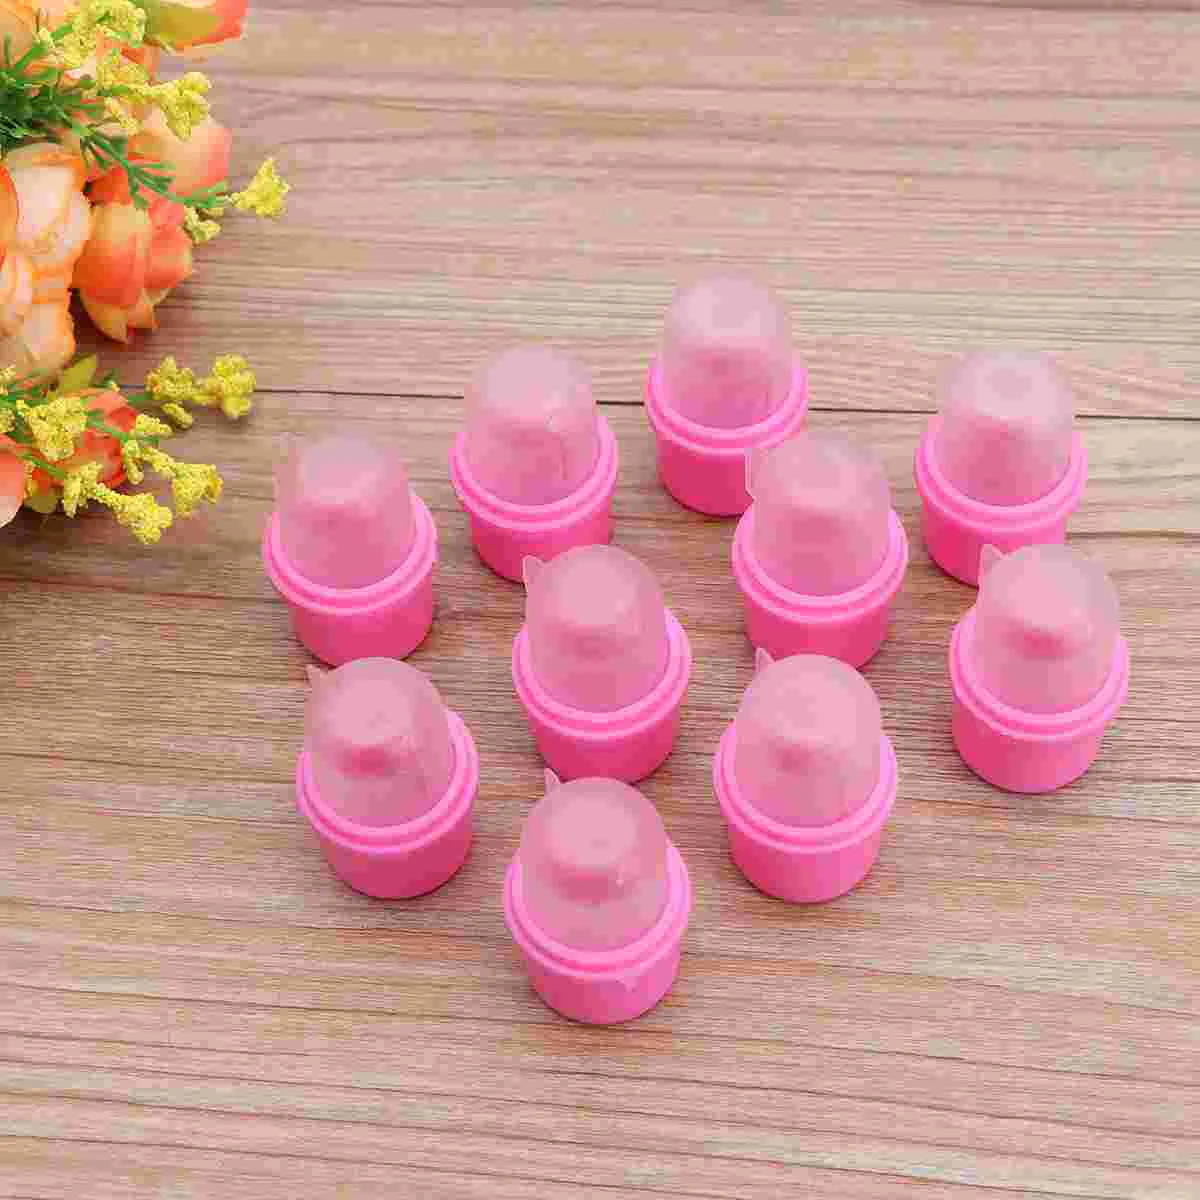 

10Pcs Manicure Nail Soaker Covers Crystal Nail Removing Covers Nail Polish Removers Practical Manicure Tools